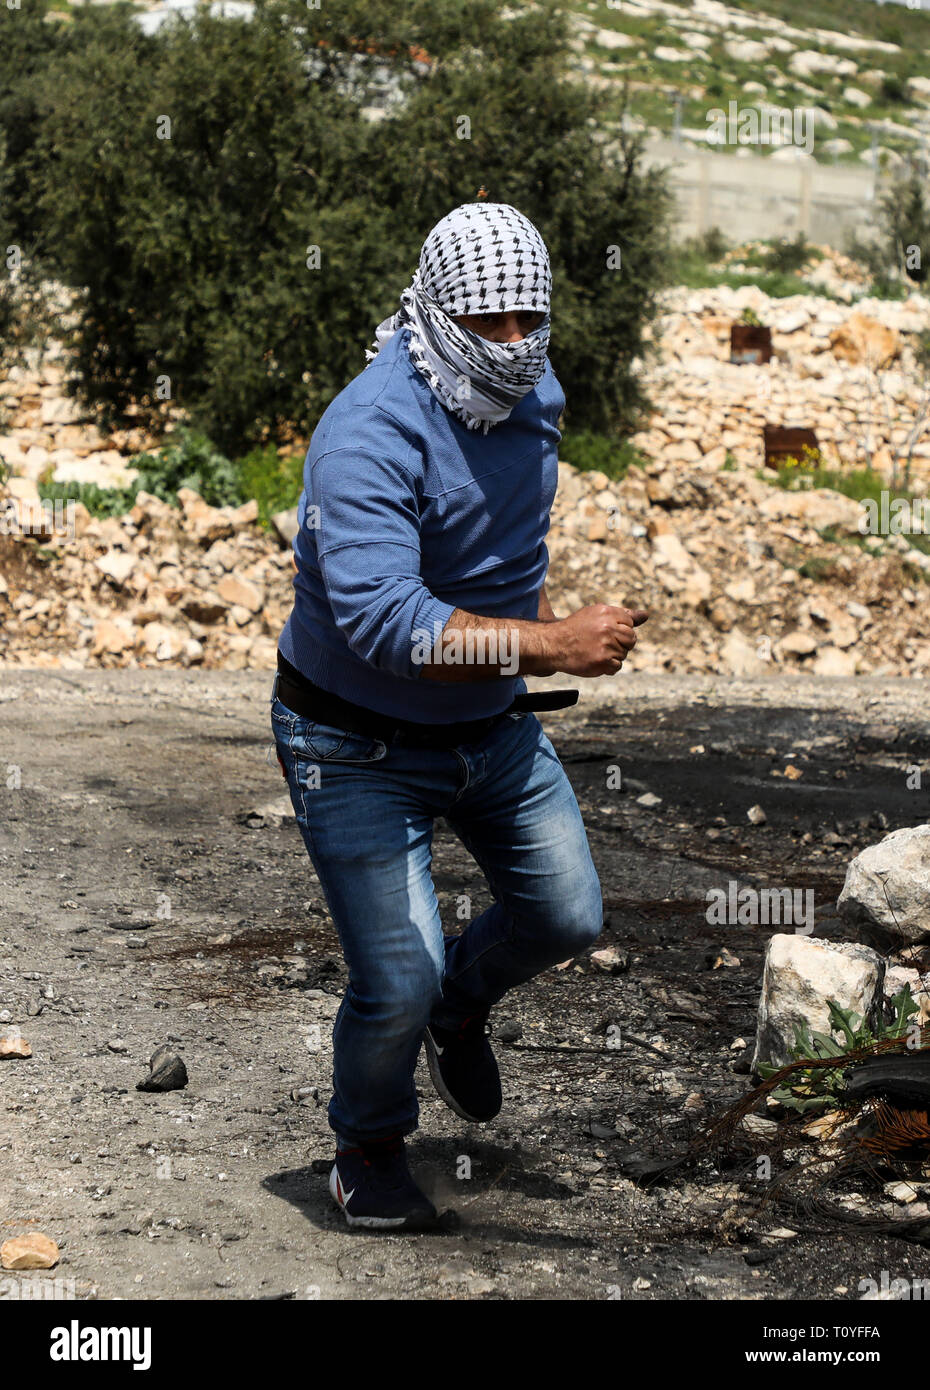 Qalqilya, West Bank, 22th March 2019. Cashes occur between Palestinian demonstrators and the Israeli army in the West Bank town of Kafr Qaddum. Since 2003, the road between Kafr Qaddum and Nablus has been blocked to Palestinians and left open only to Israeli settlers and the Israeli army although an Israeli court ruled the roadblock illegal. The roadblock makes it impossible for Palestinians to reach their farmlands by car and lengthens the distance to Nablus of 14 Km. Credit: ZUMA Press, Inc./Alamy Live News Stock Photo